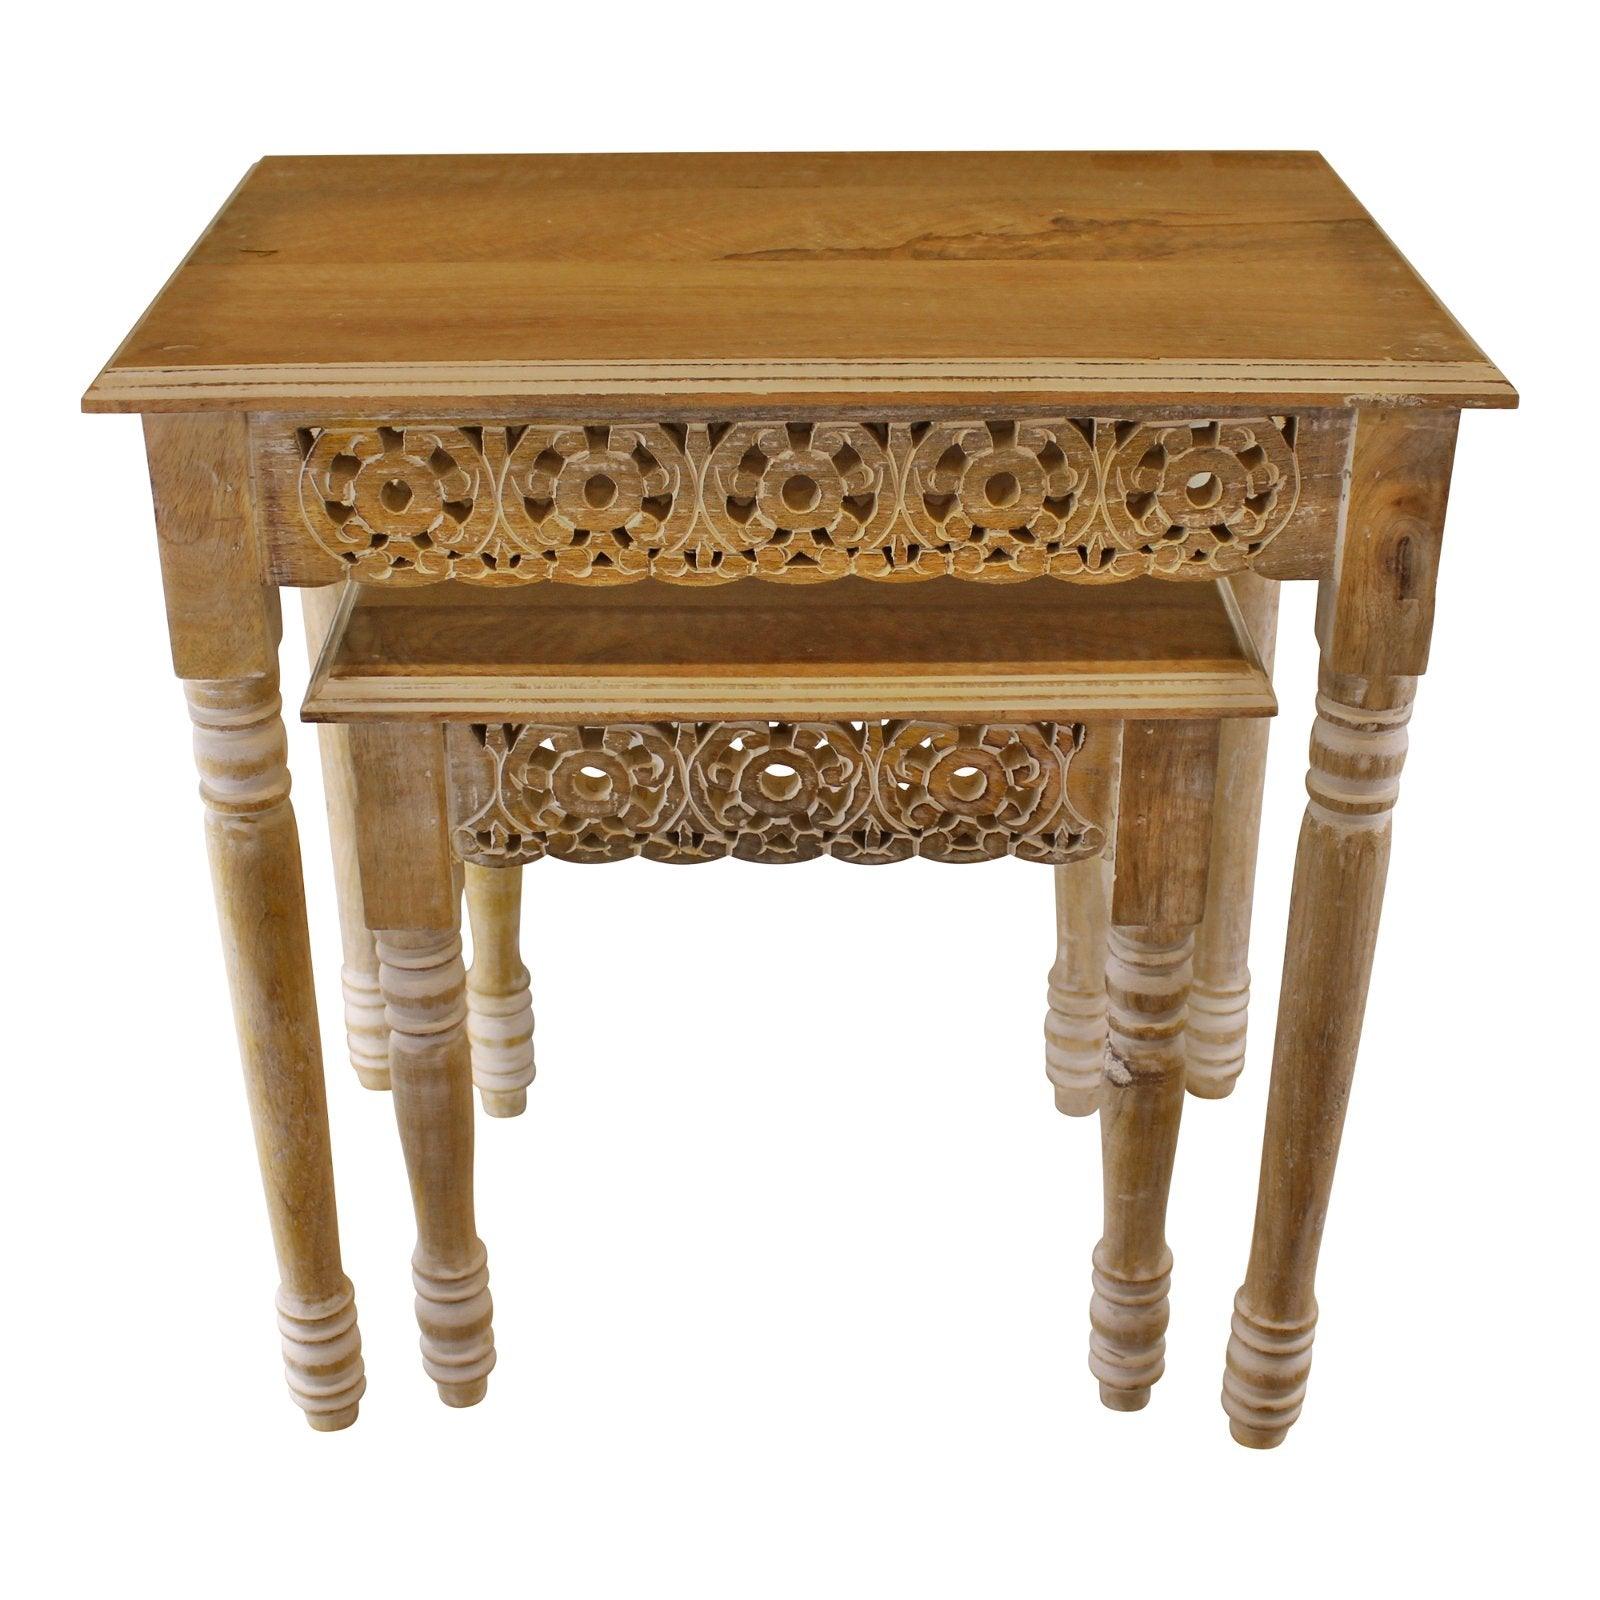 View Set of 2 Carved Edge Wooden Side Tables information